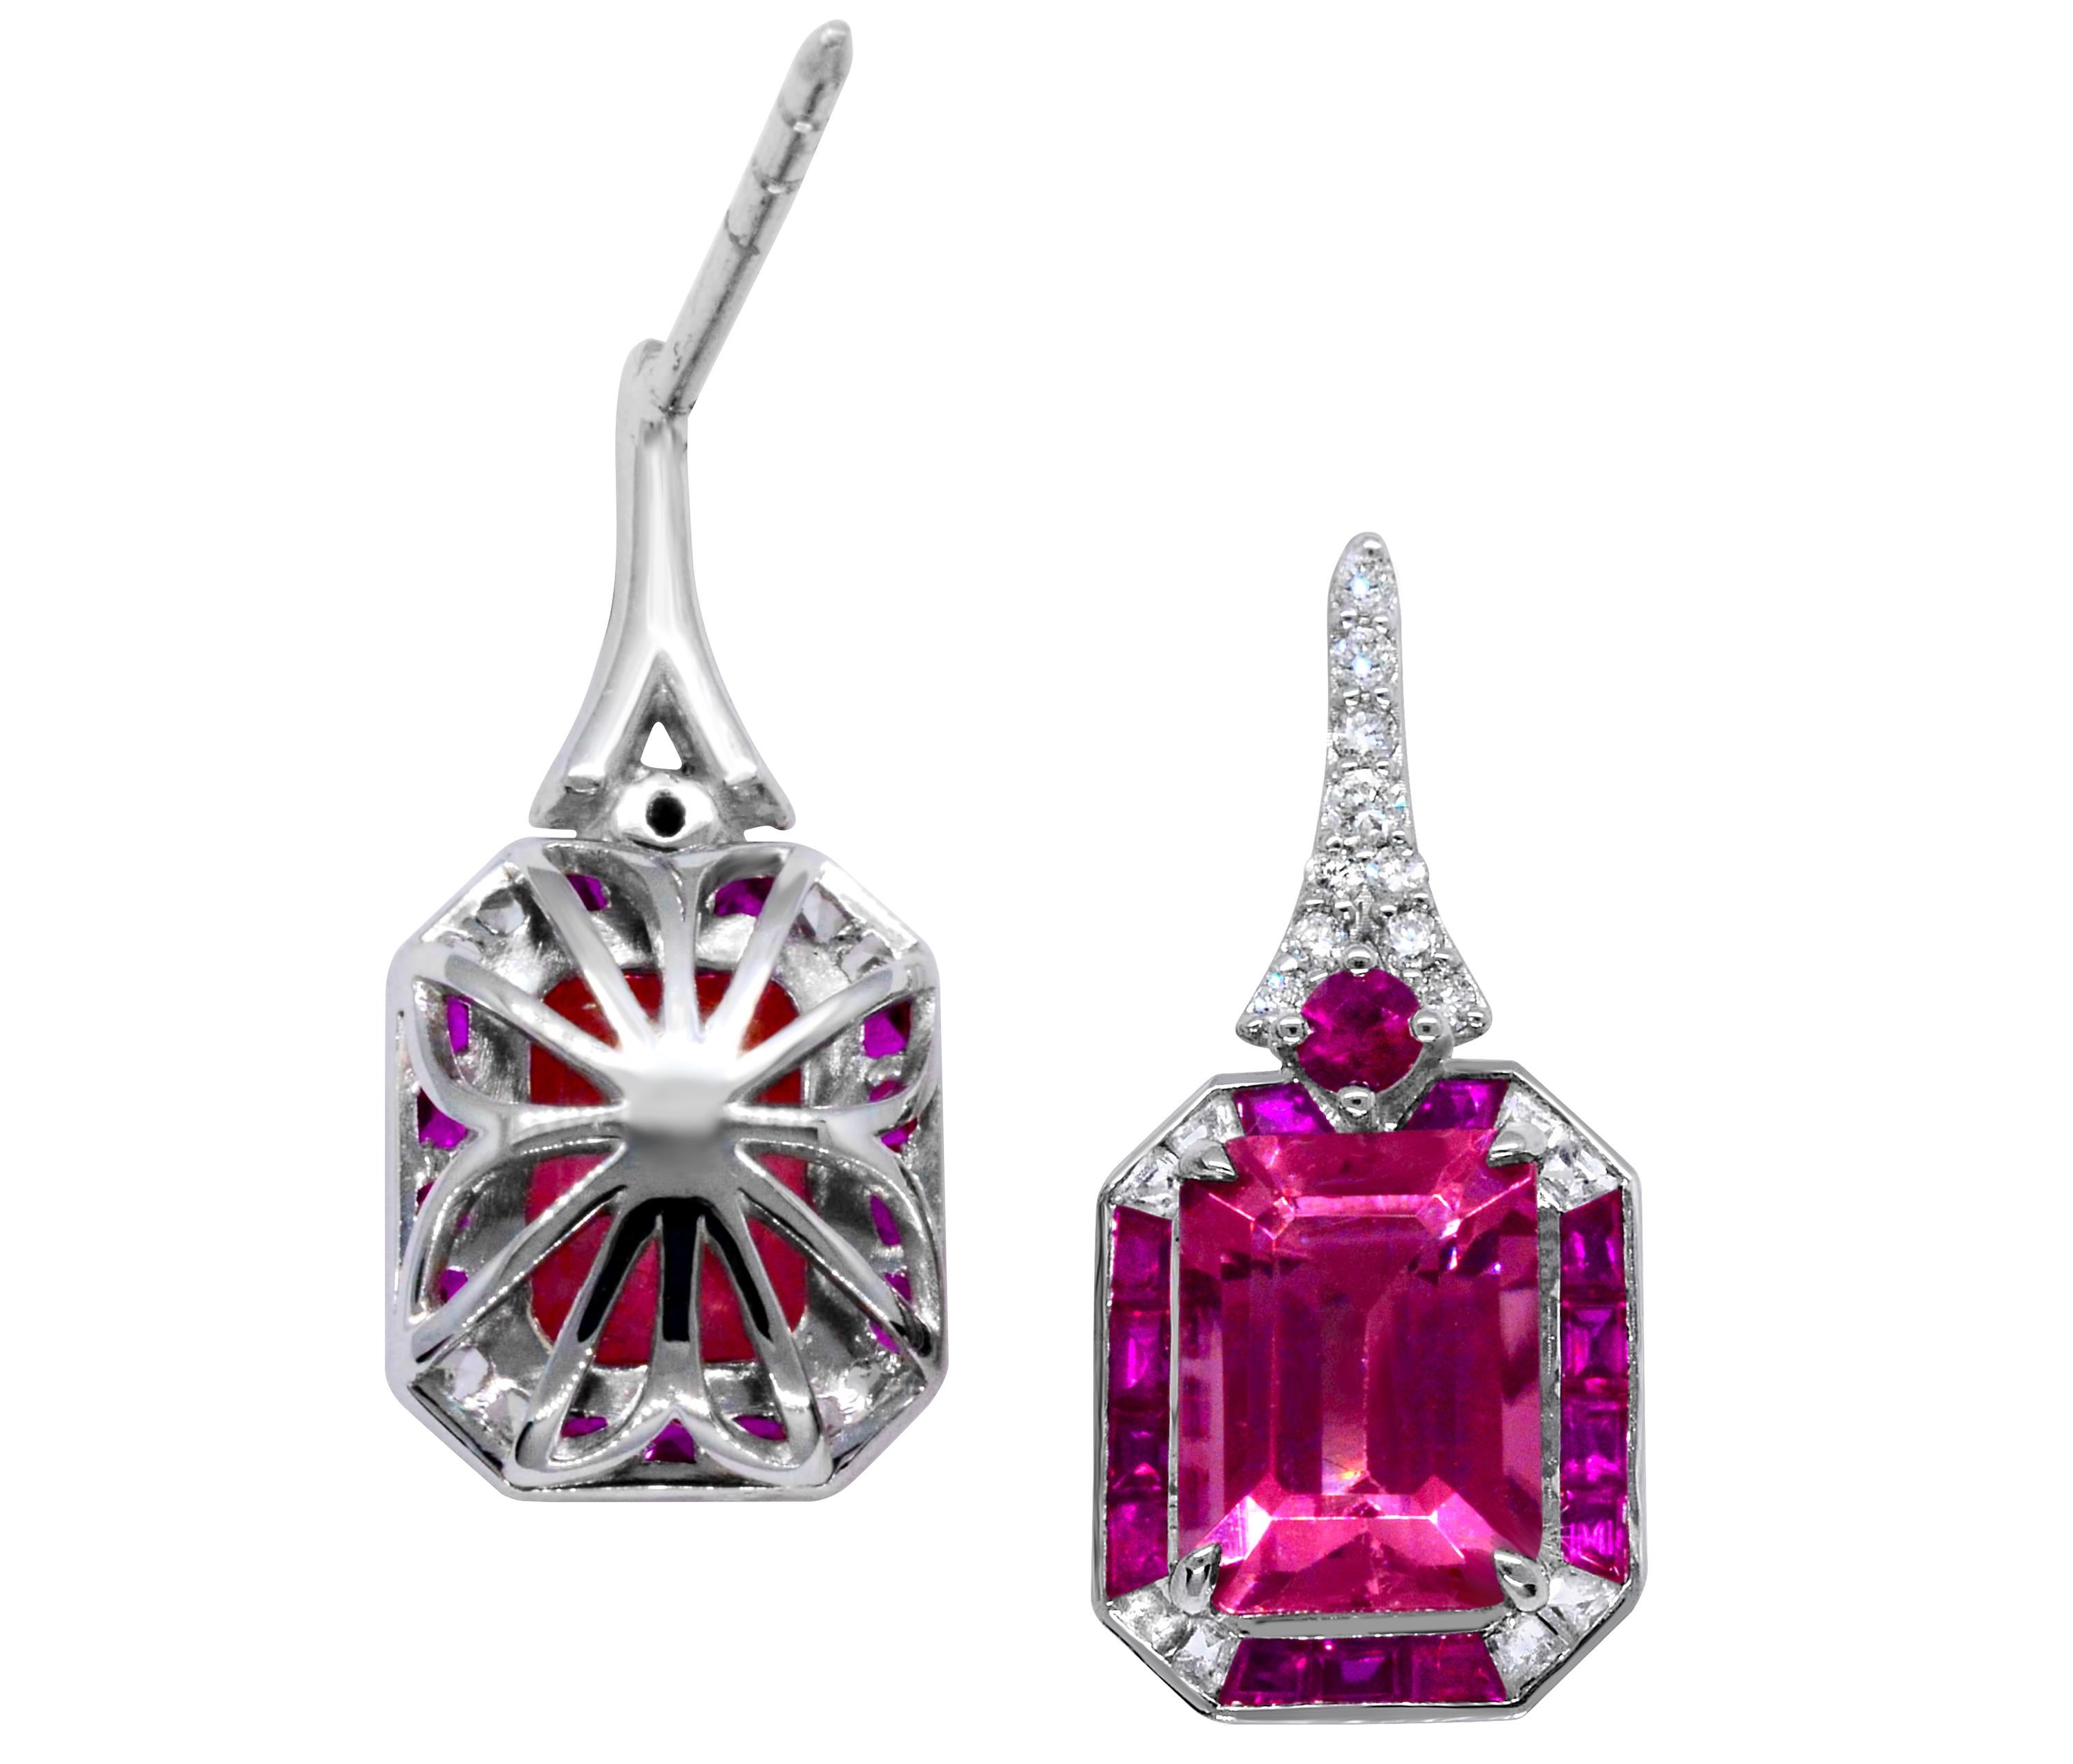 Emerald Cut Pink Tourmaline with Ruby, White Sapphire and Diamond Cocktail earrings.  These emerald-cut pink tourmaline earrings are framed by baguette rubies, white sapphire and diamonds.  There is a total gemstone weight of over 7.0 carats in